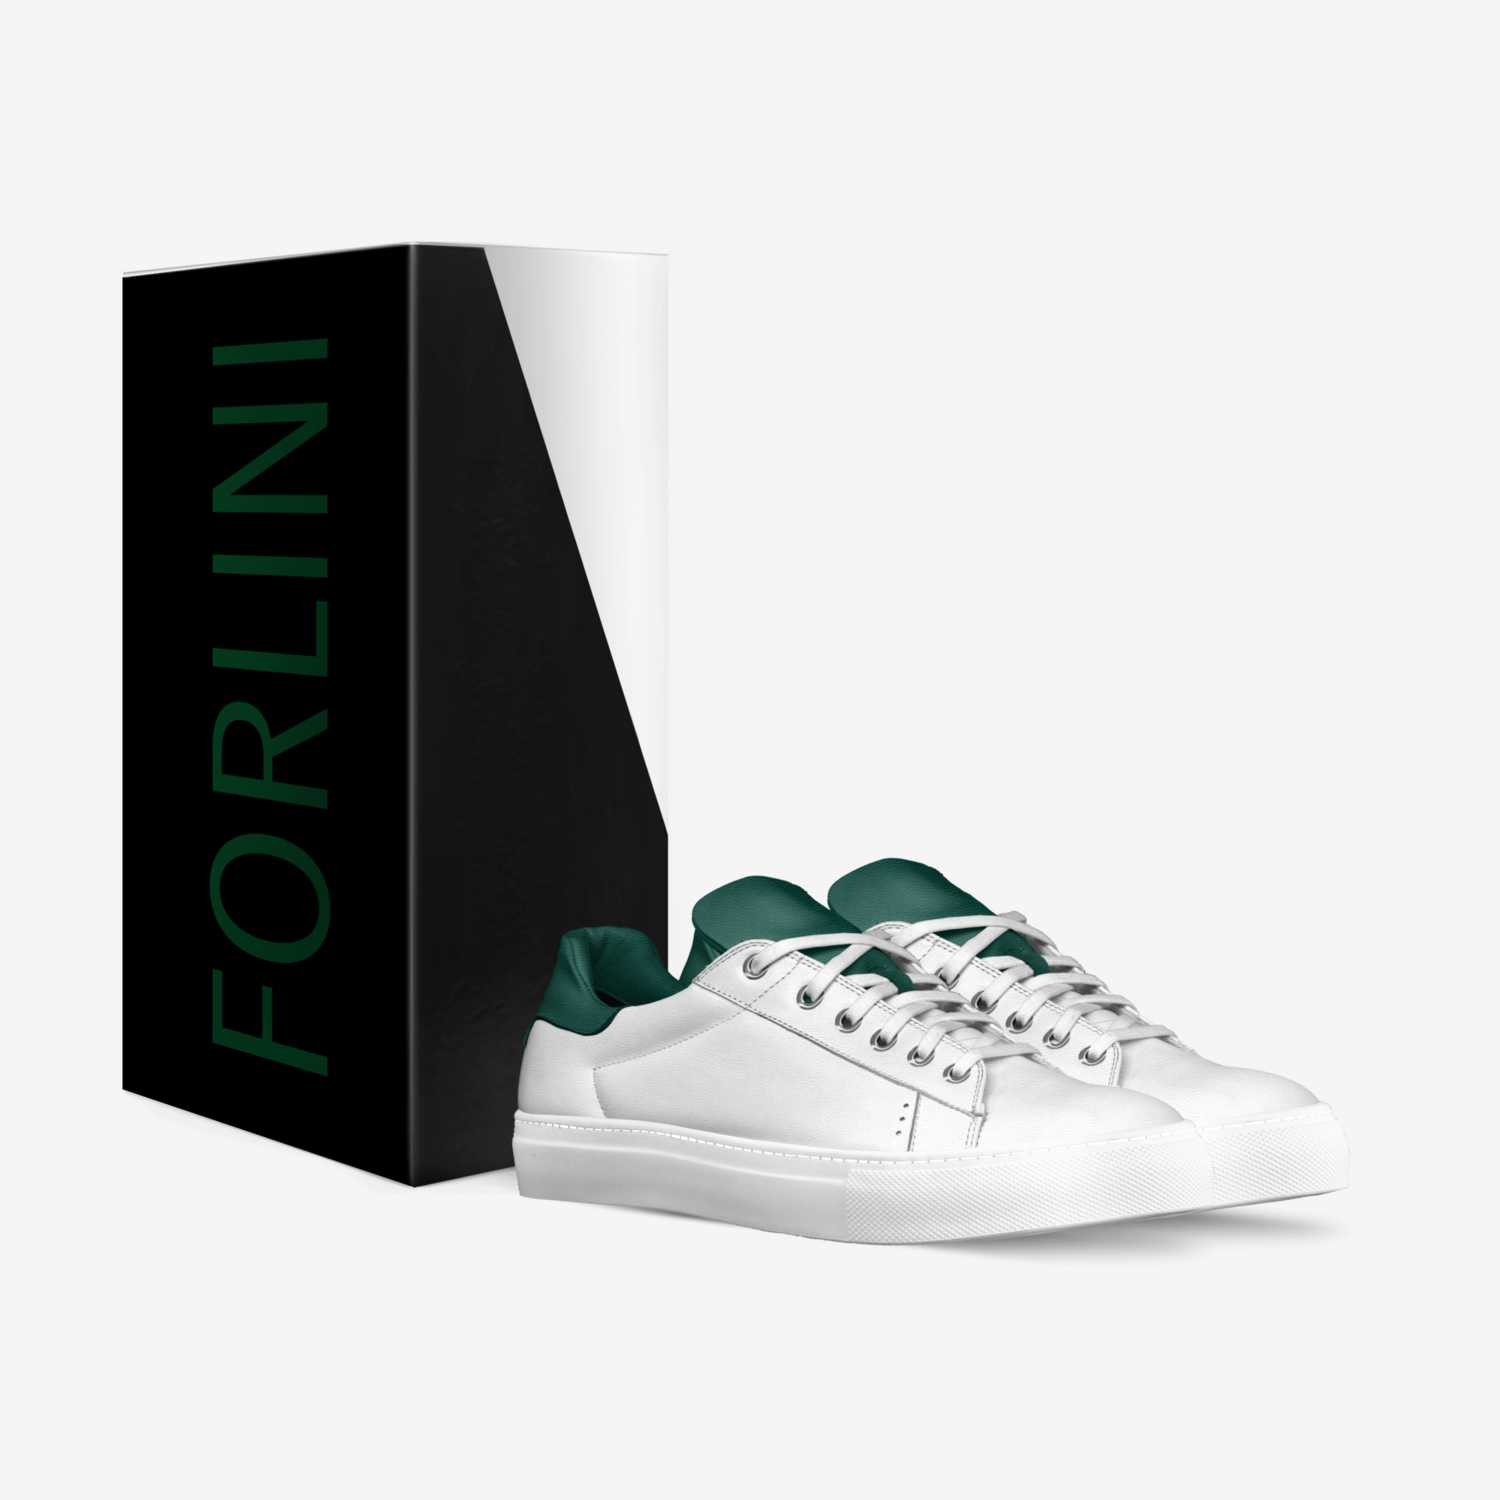 Forlini custom made in Italy shoes by Anthony Forlin | Box view